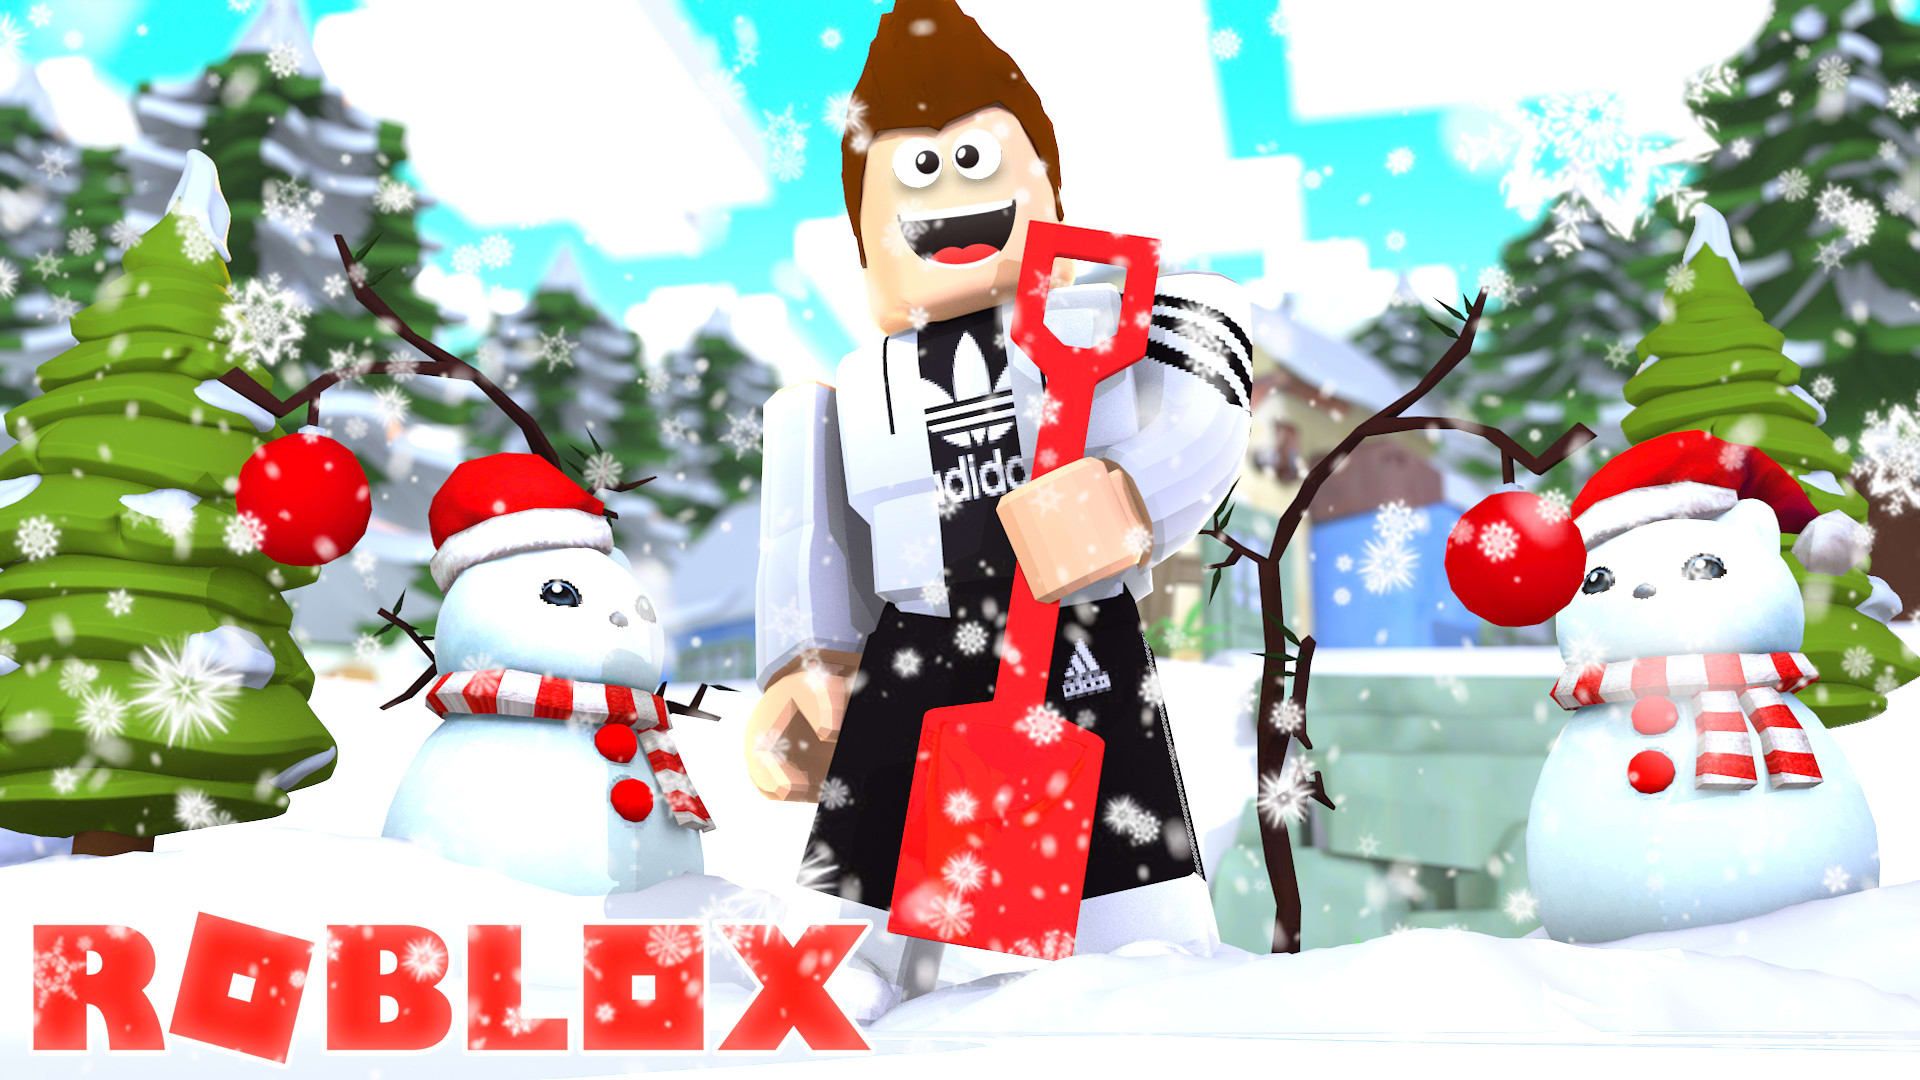 Christmas Roblox Girl Wallpapers Wallpaper Cave - roblox girl pictures christmas